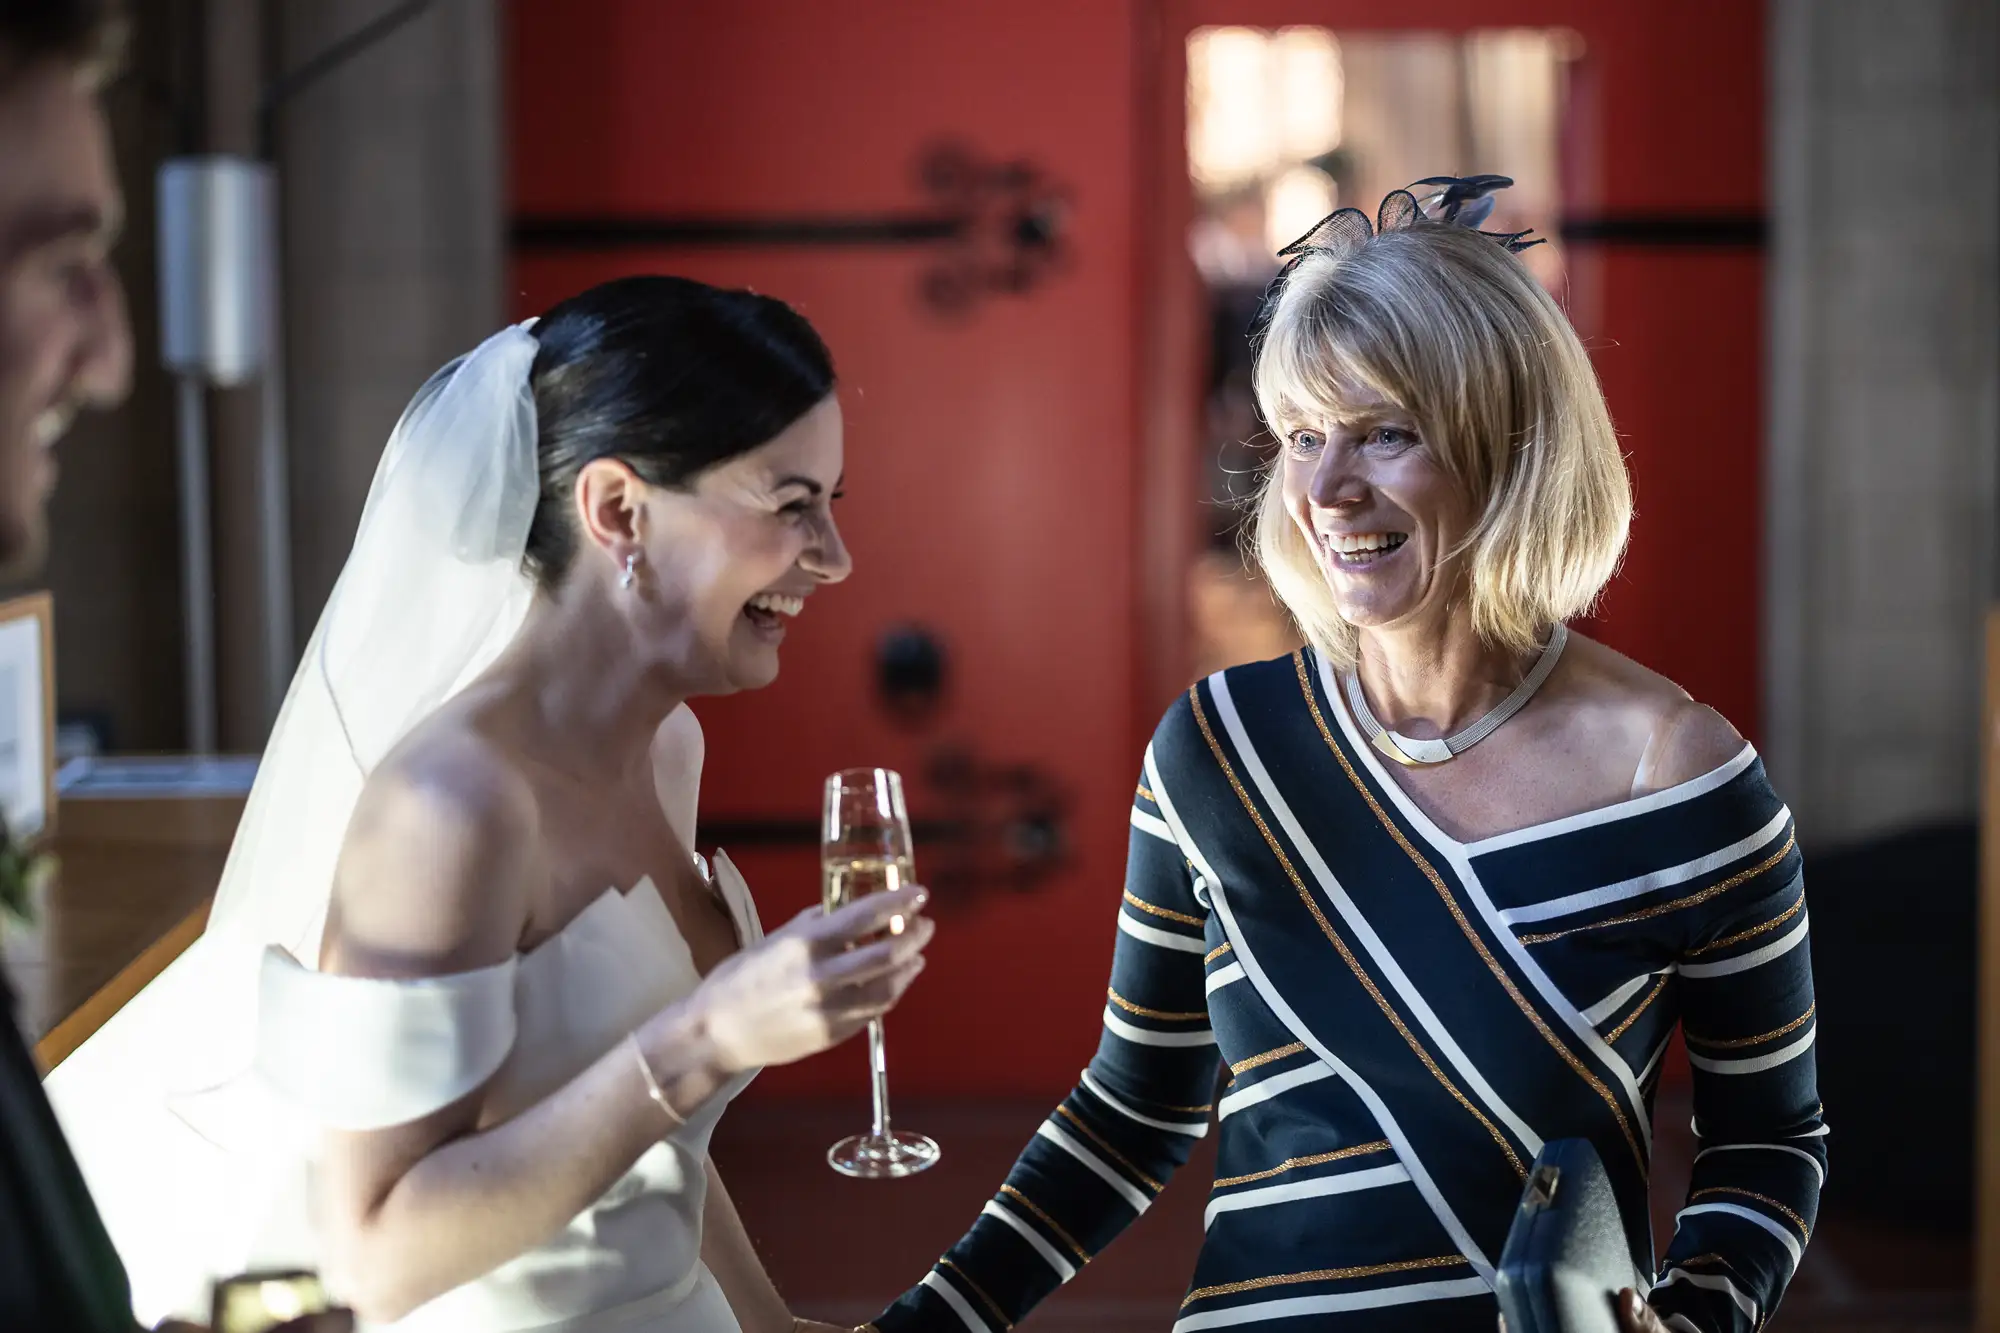 A bride and an older woman smiling and talking indoors at a wedding, both holding glasses of champagne.